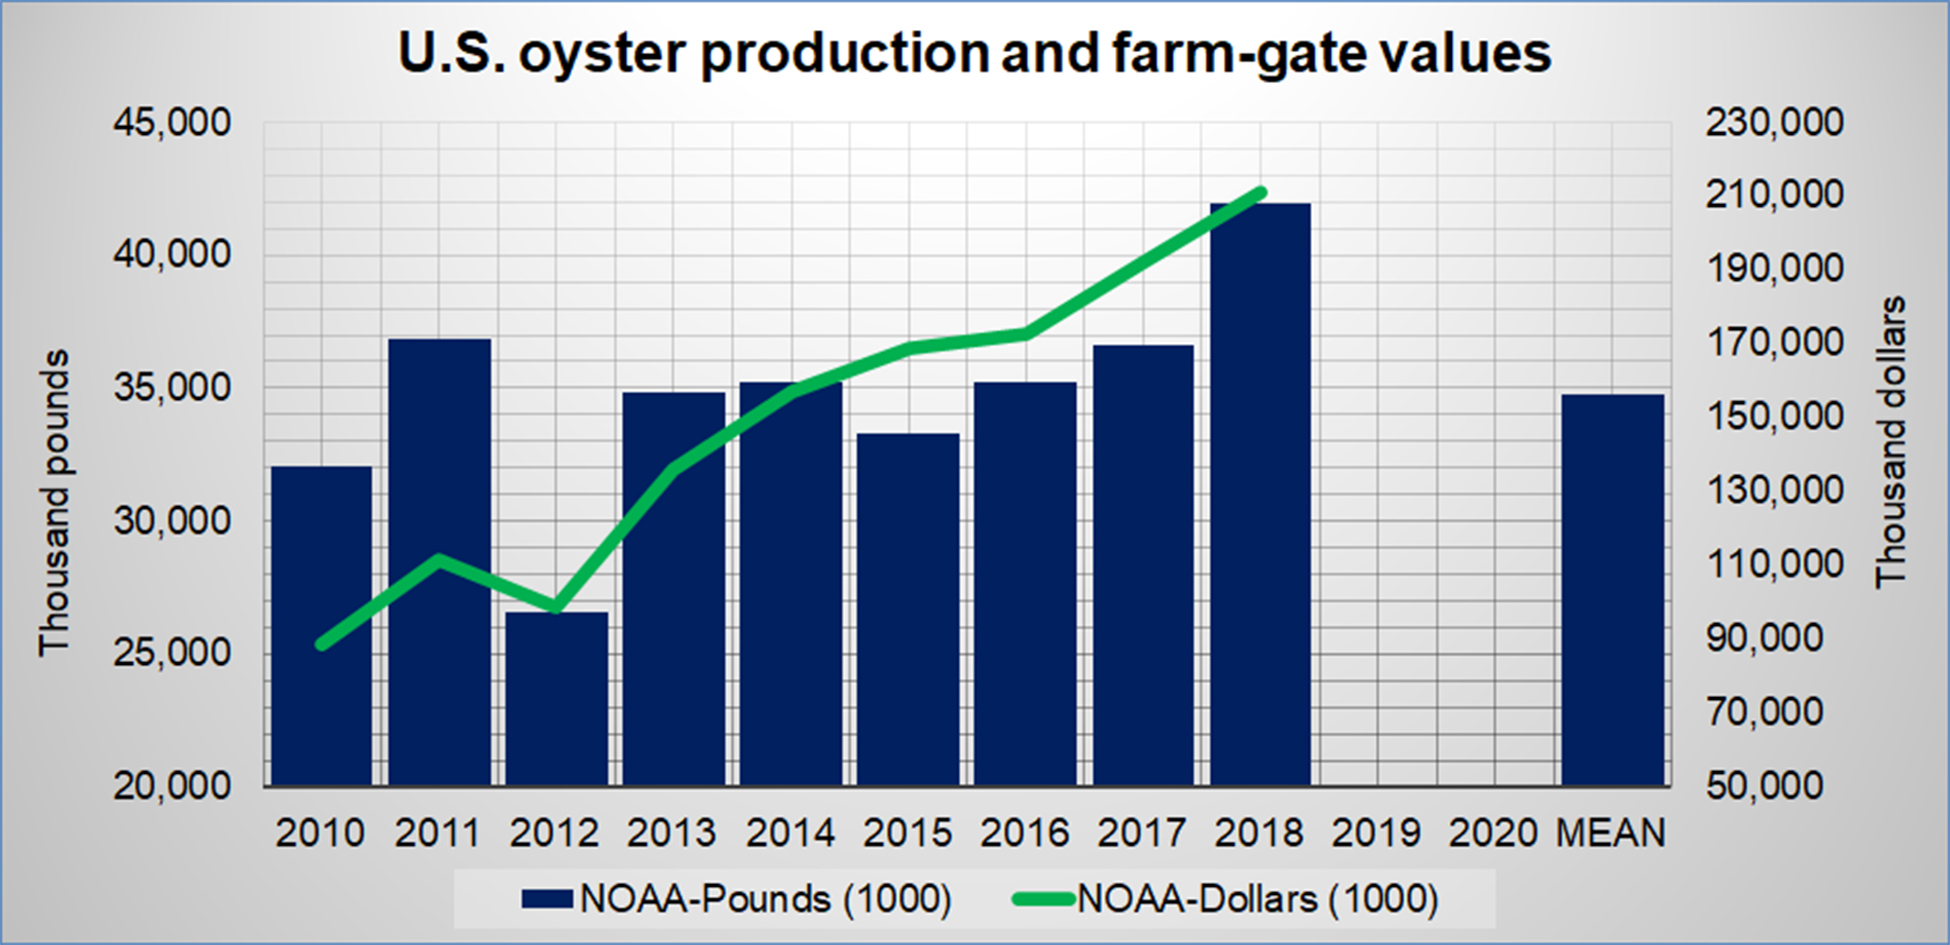 Oyster production